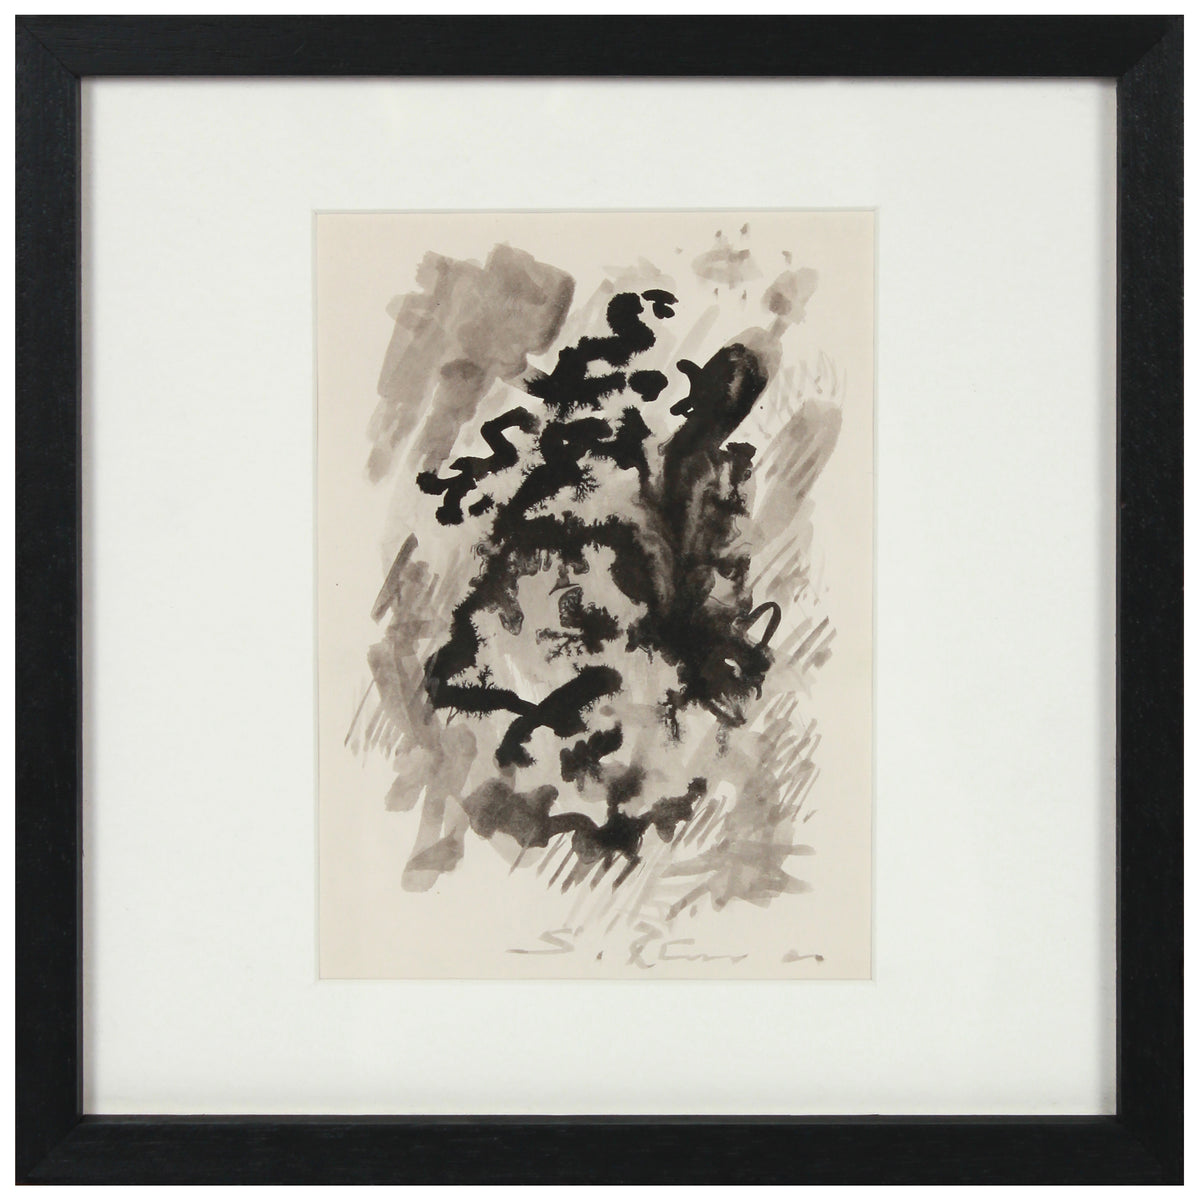 Abstract Monochromatic Drawing &lt;br&gt;1966 Ink Wash on Paper &lt;br&gt;&lt;br&gt;#14792